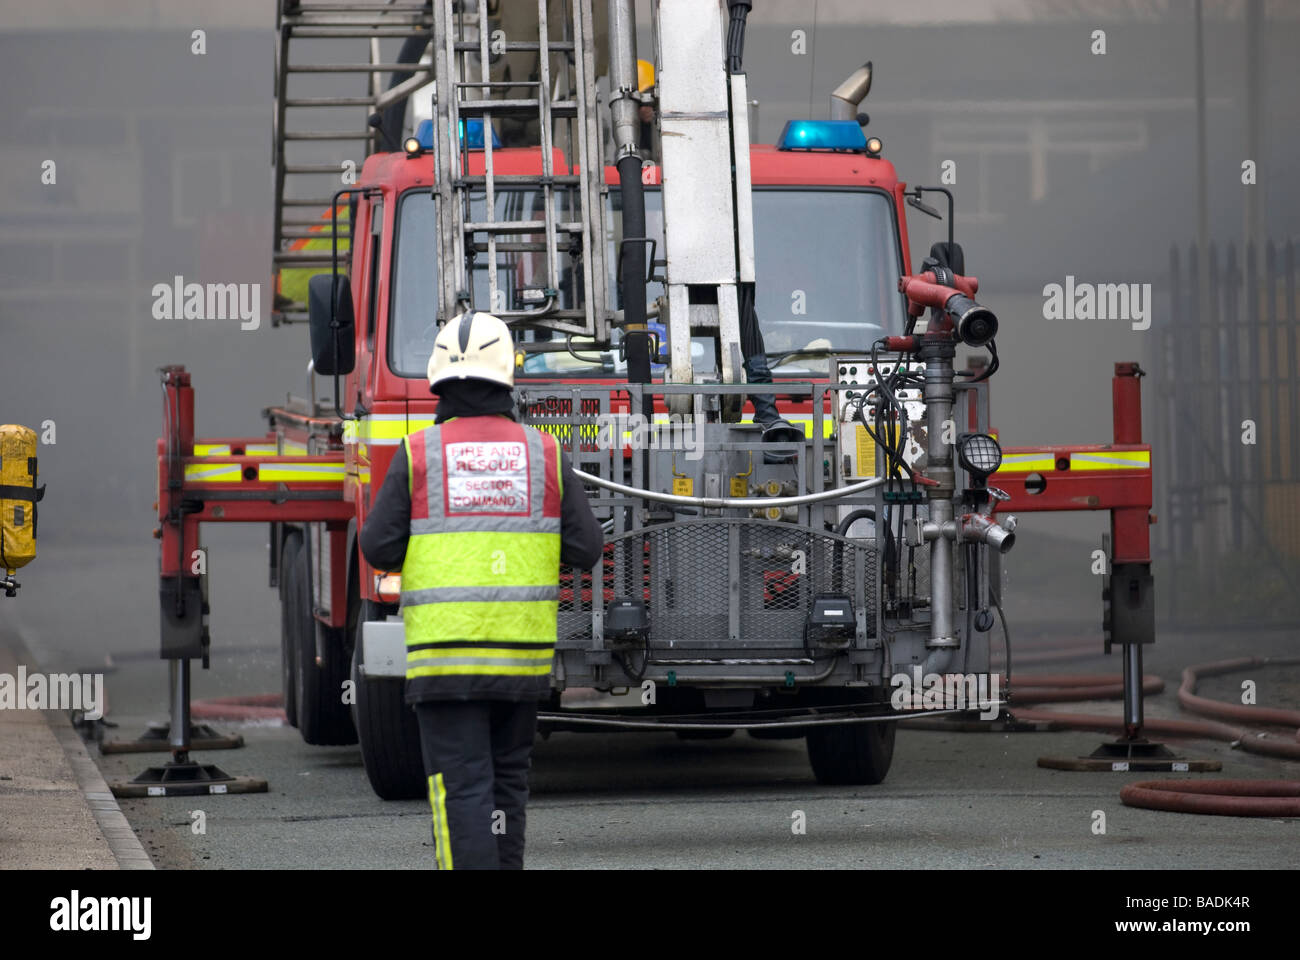 Firefighter in front of fire brigade hydraulic platform FULLY MODEL RELEASED Stock Photo